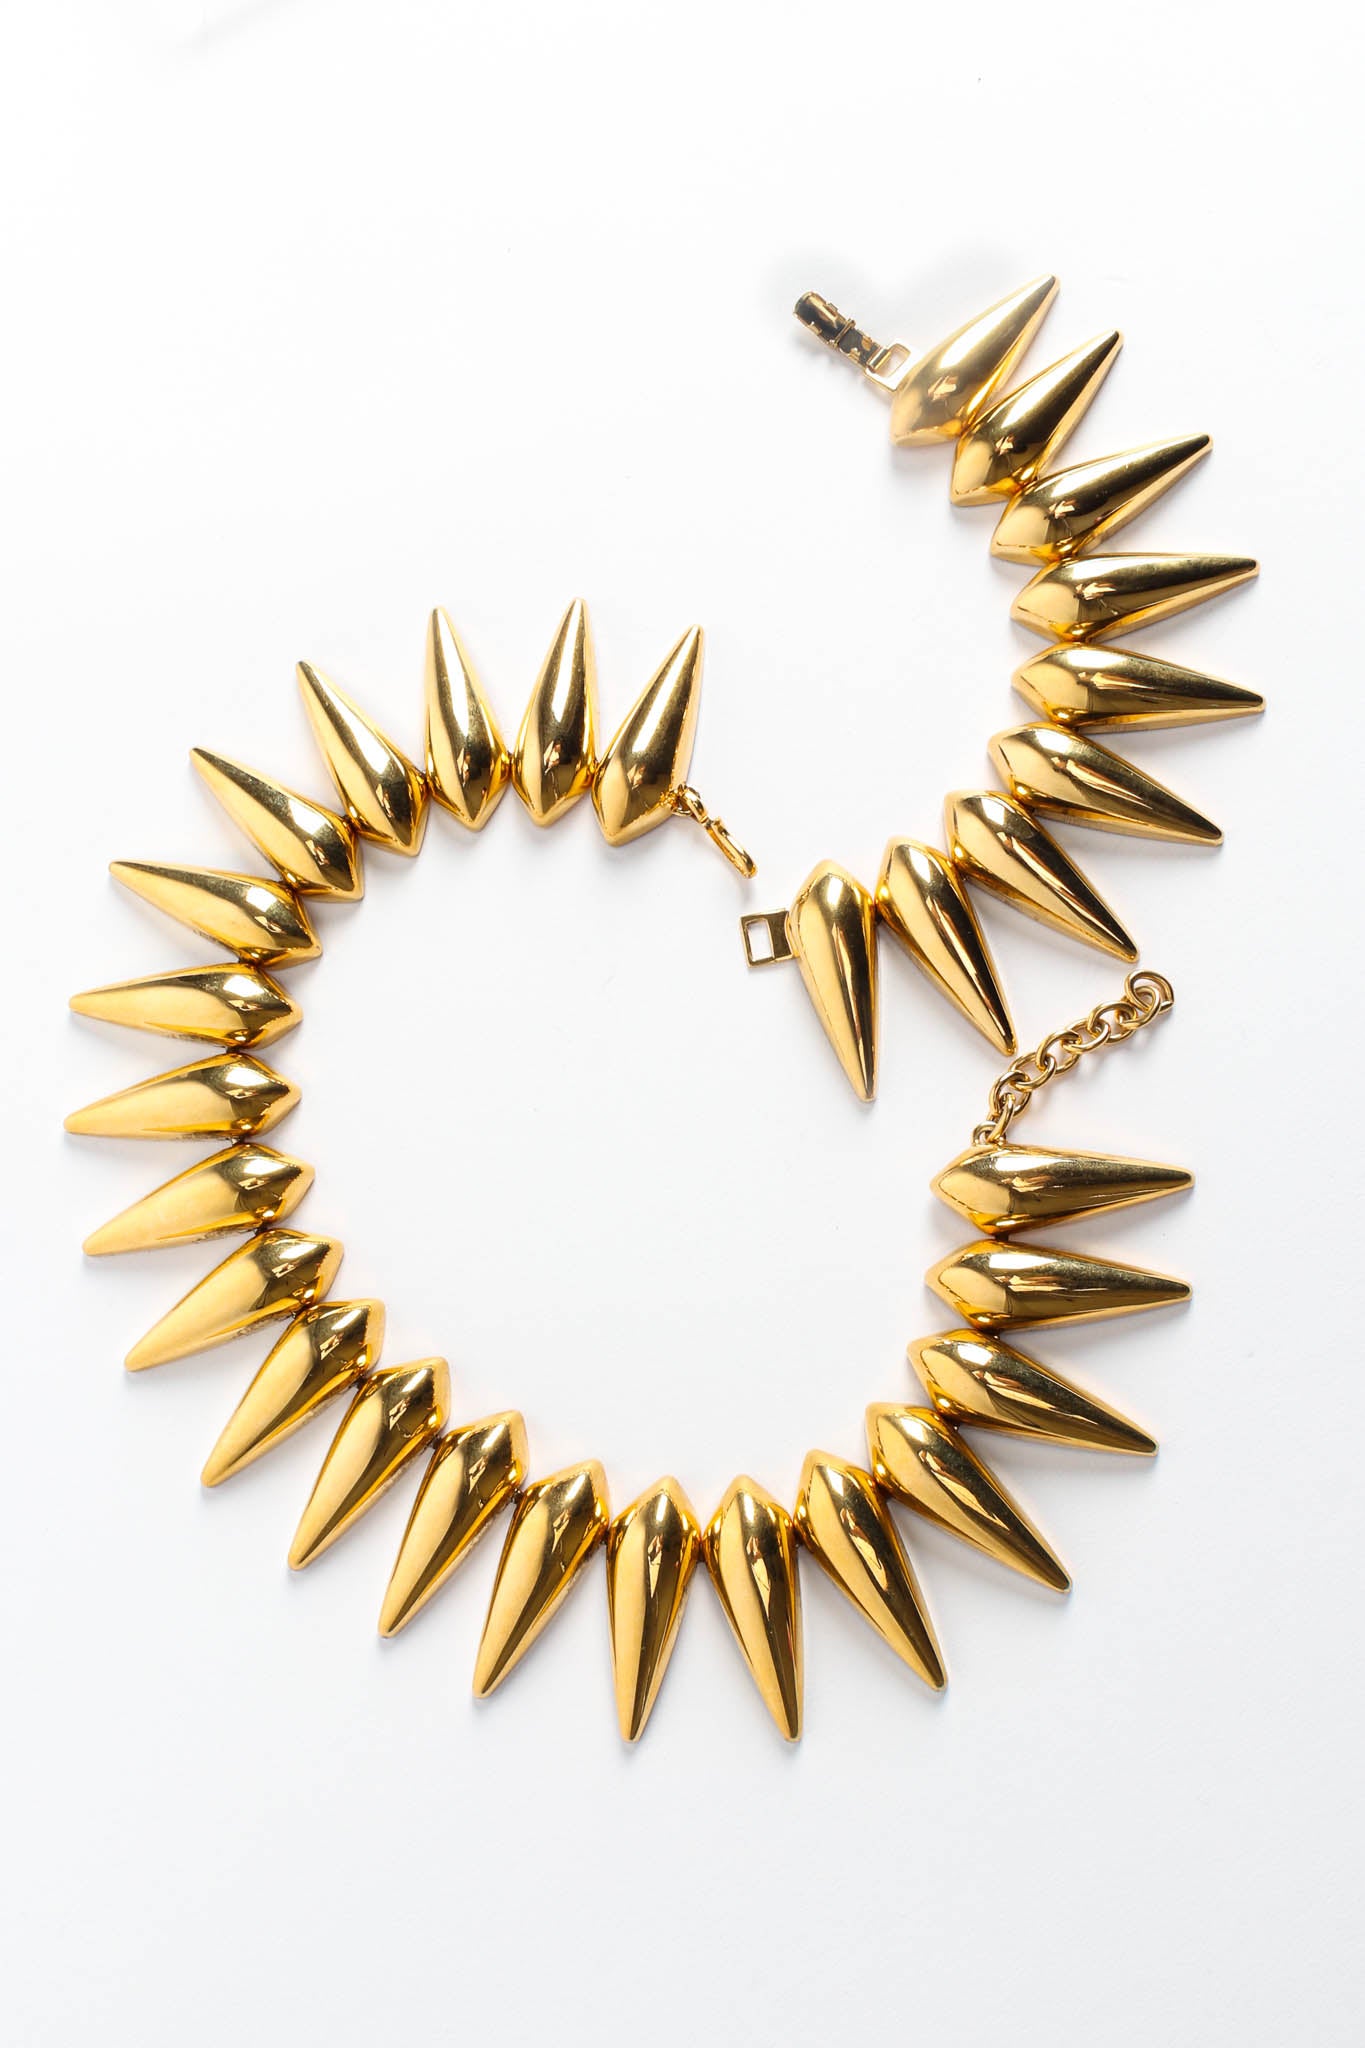 Vintage Monet Claw Spike Bracelet and Necklace @ Recess Los Angeles